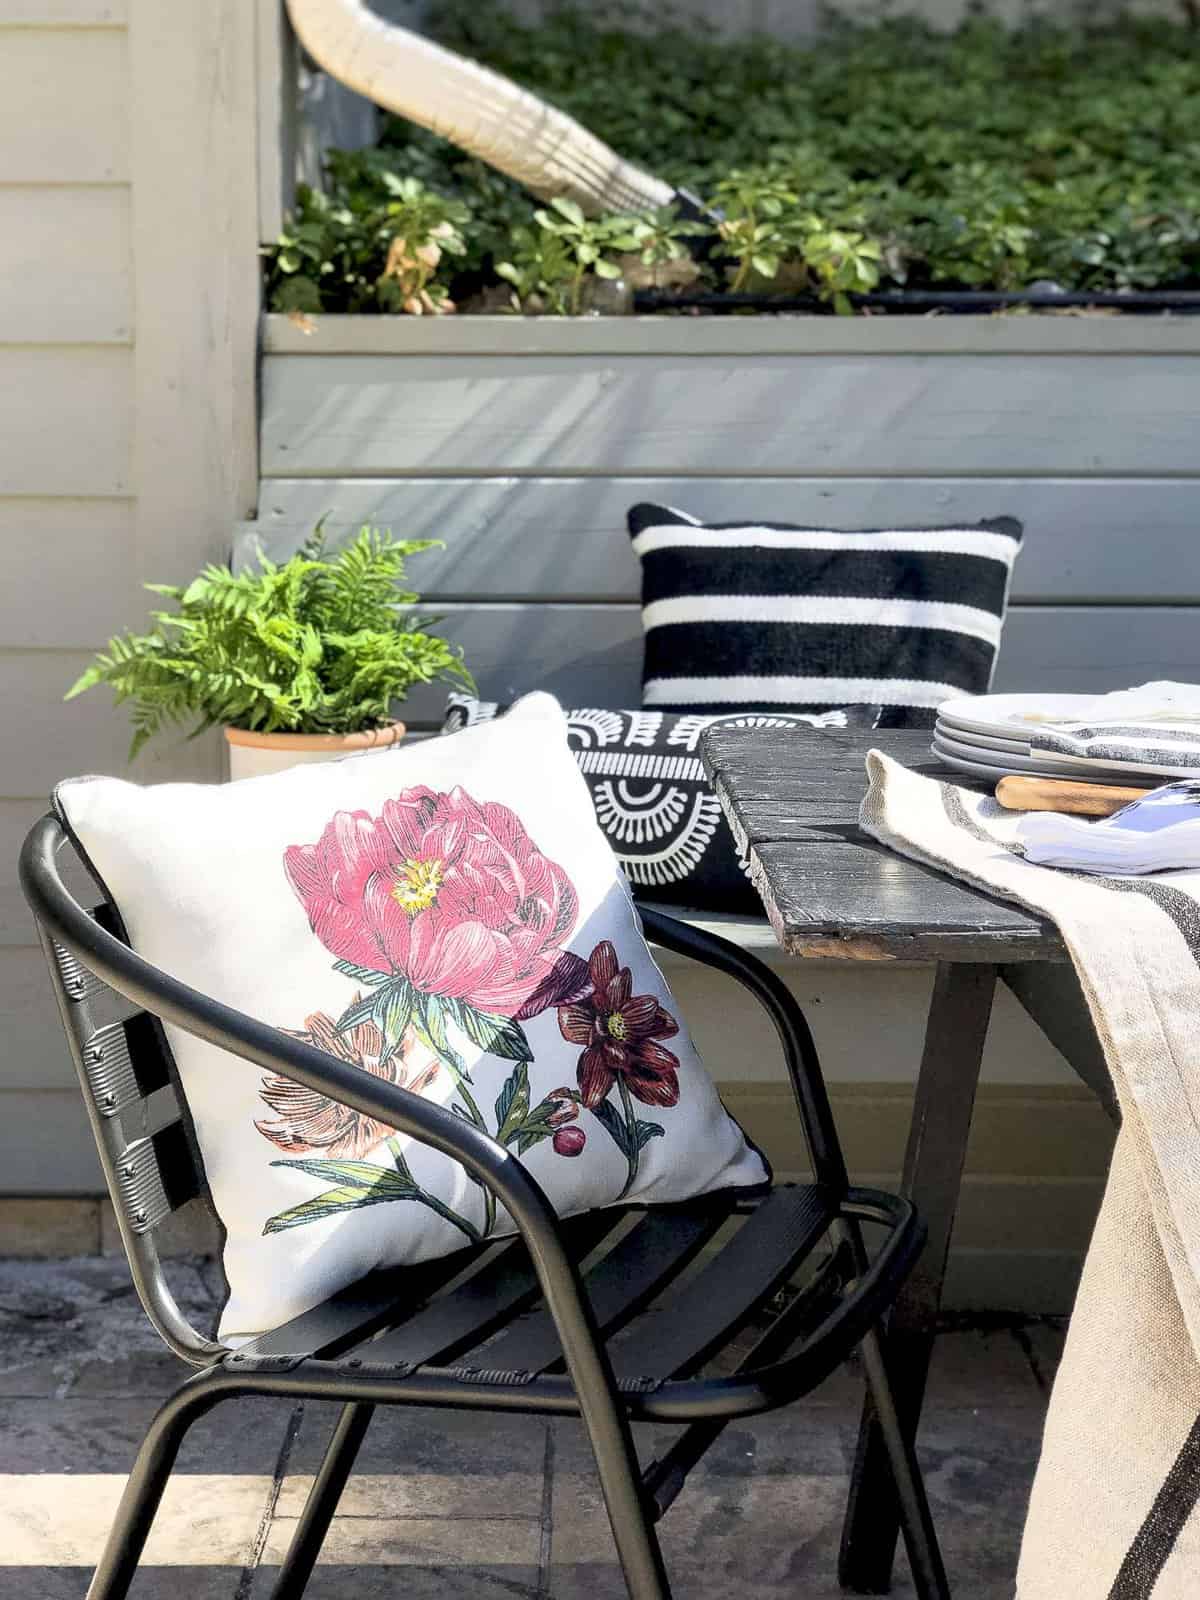 Do you love outdoor entertaining? Today I'm sharing simple ways to style your back patio with durable furniture and effortless decor for easy entertaining. #fromhousetohaven #patiodecor #outdoordining #backpatio